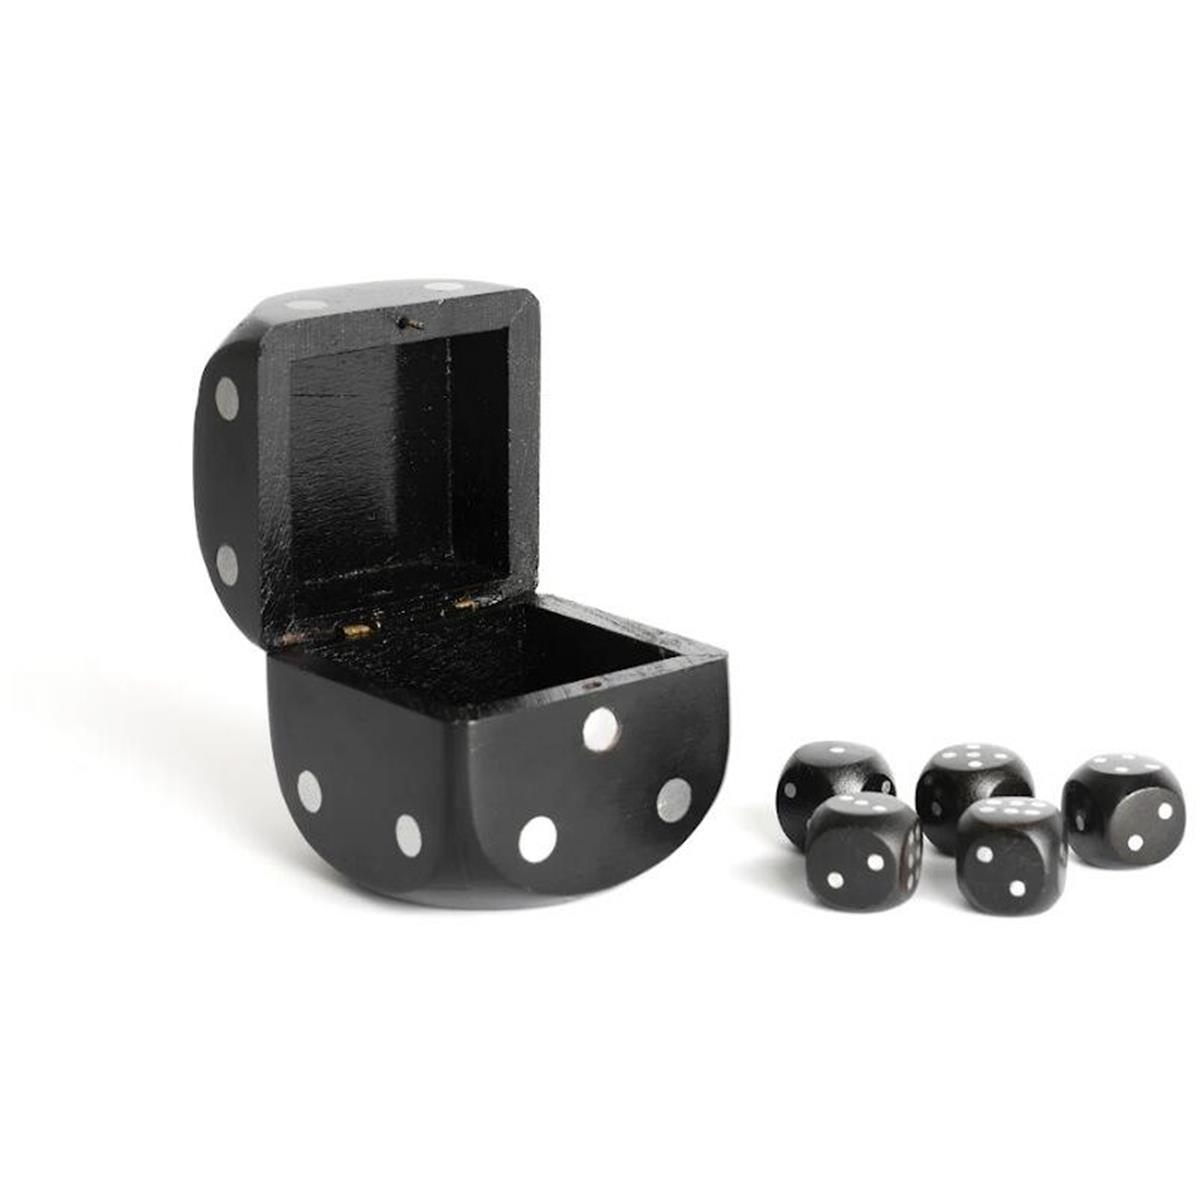 Picture of Authentic Models GR031B Black & Silver Black Dice Box with 5 Dices